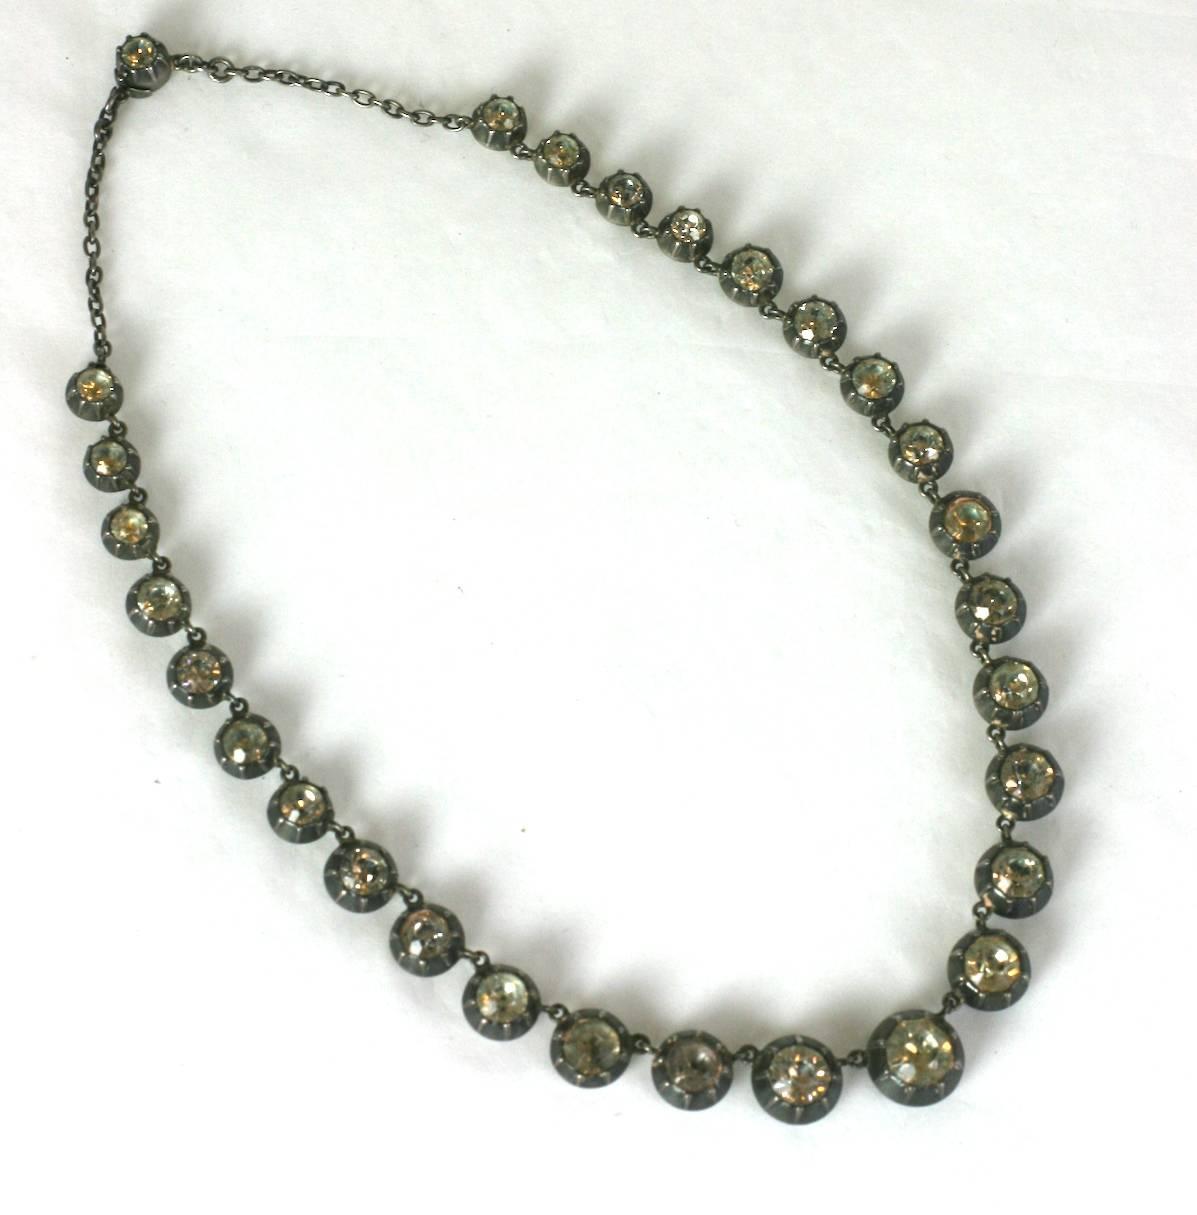 Georgian Paste Riviere Necklace set in silver. Early 18th Century manufacture with period closed back settings and faceted foil backed pastes. Graduated riviere configuration with a period chain extension. Sterling silver 1820's UK. 
Excellent